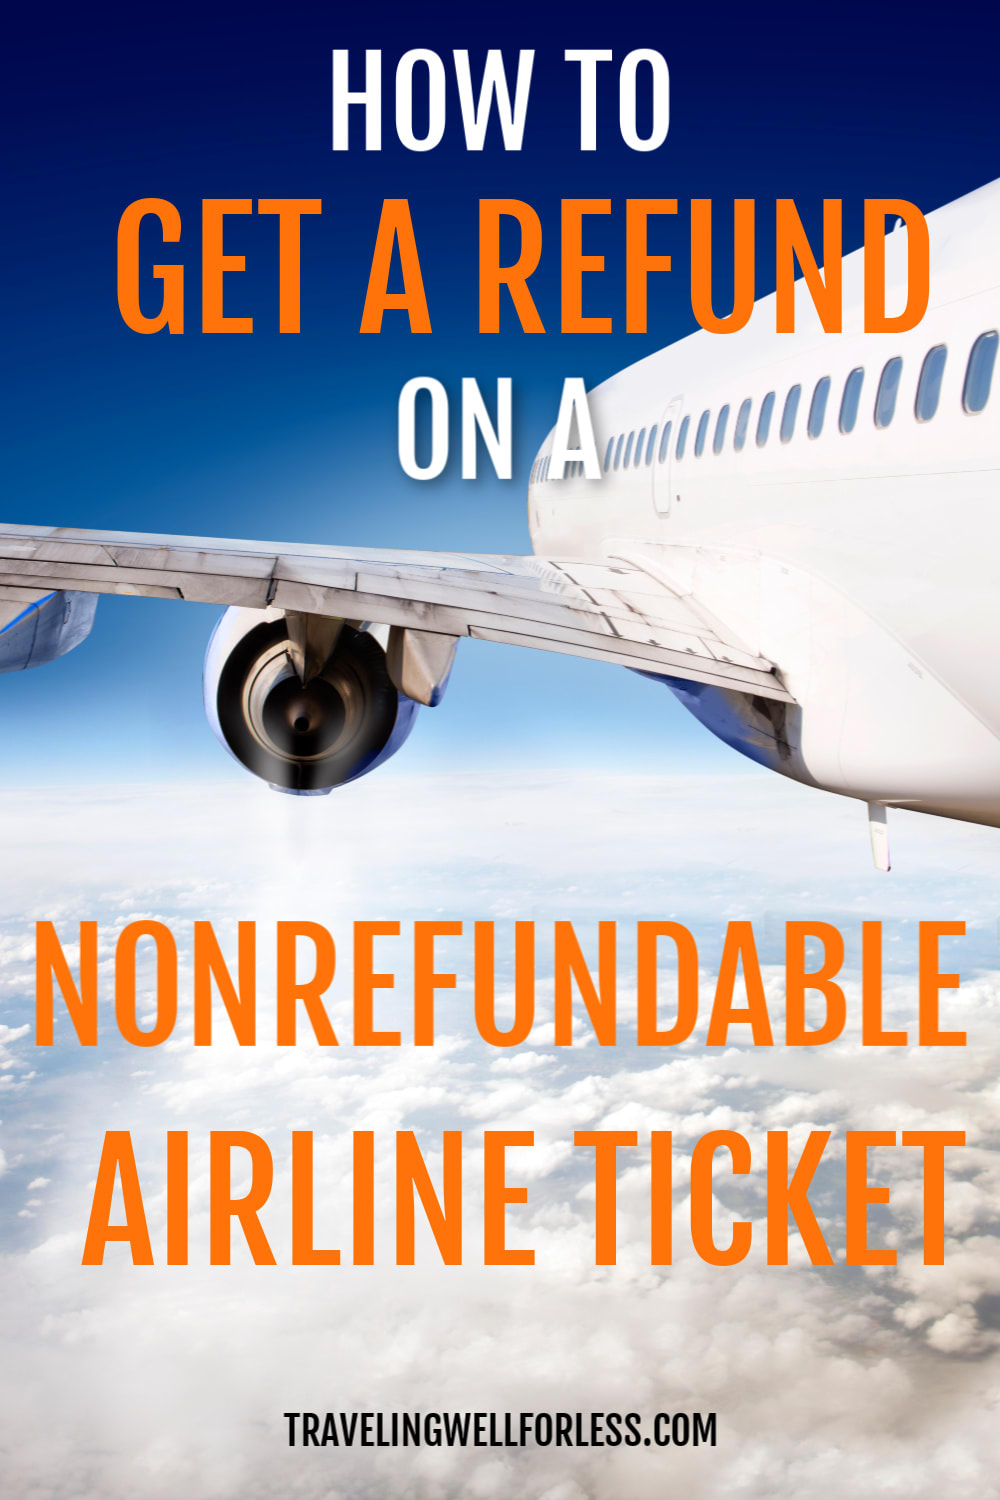 How to Get a Refund on a Nonrefundable Ticket